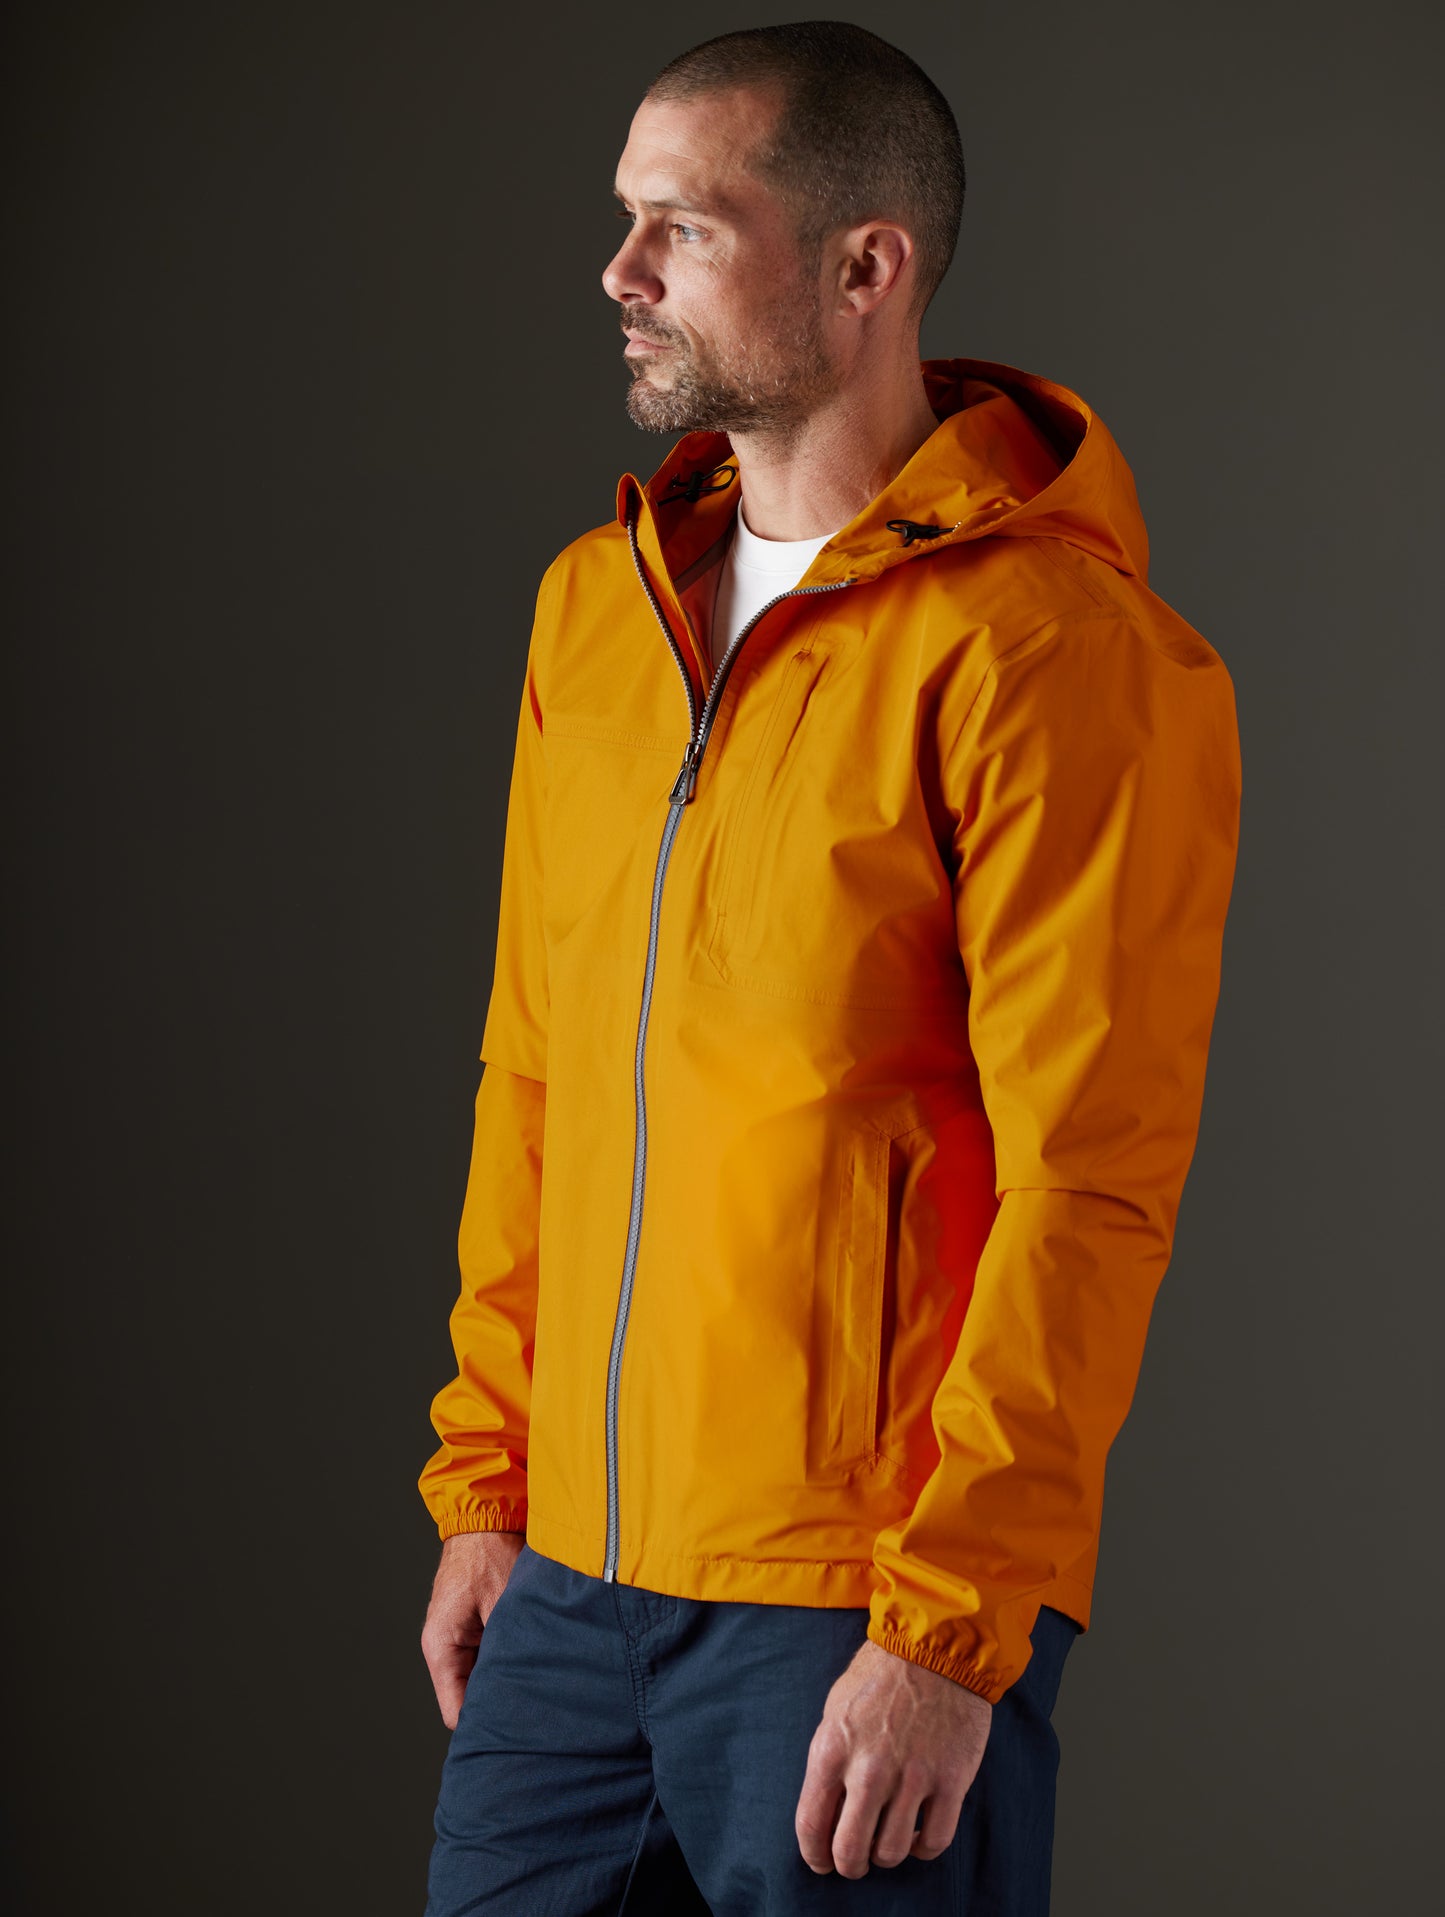 man wearing orange jacket from AETHER Apparel